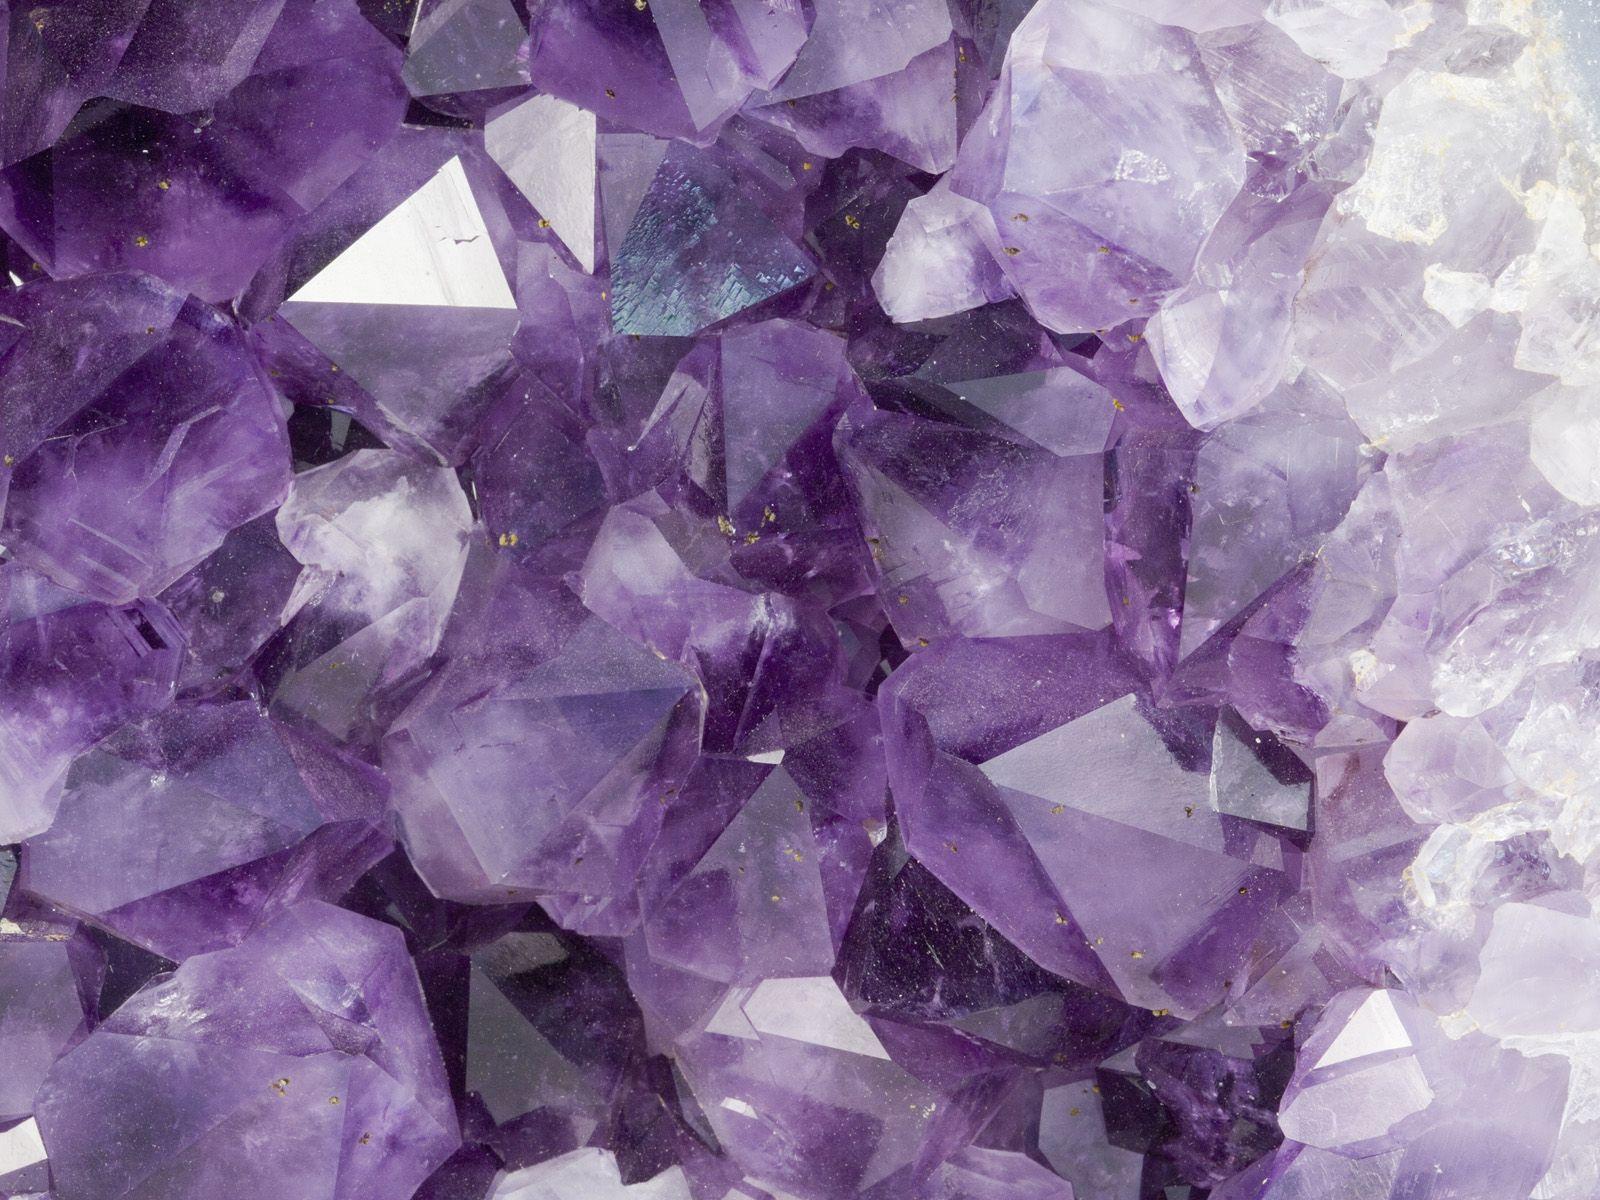 Crystals Last chance for Facebook  Aesthetic Wallpapers  Facebook